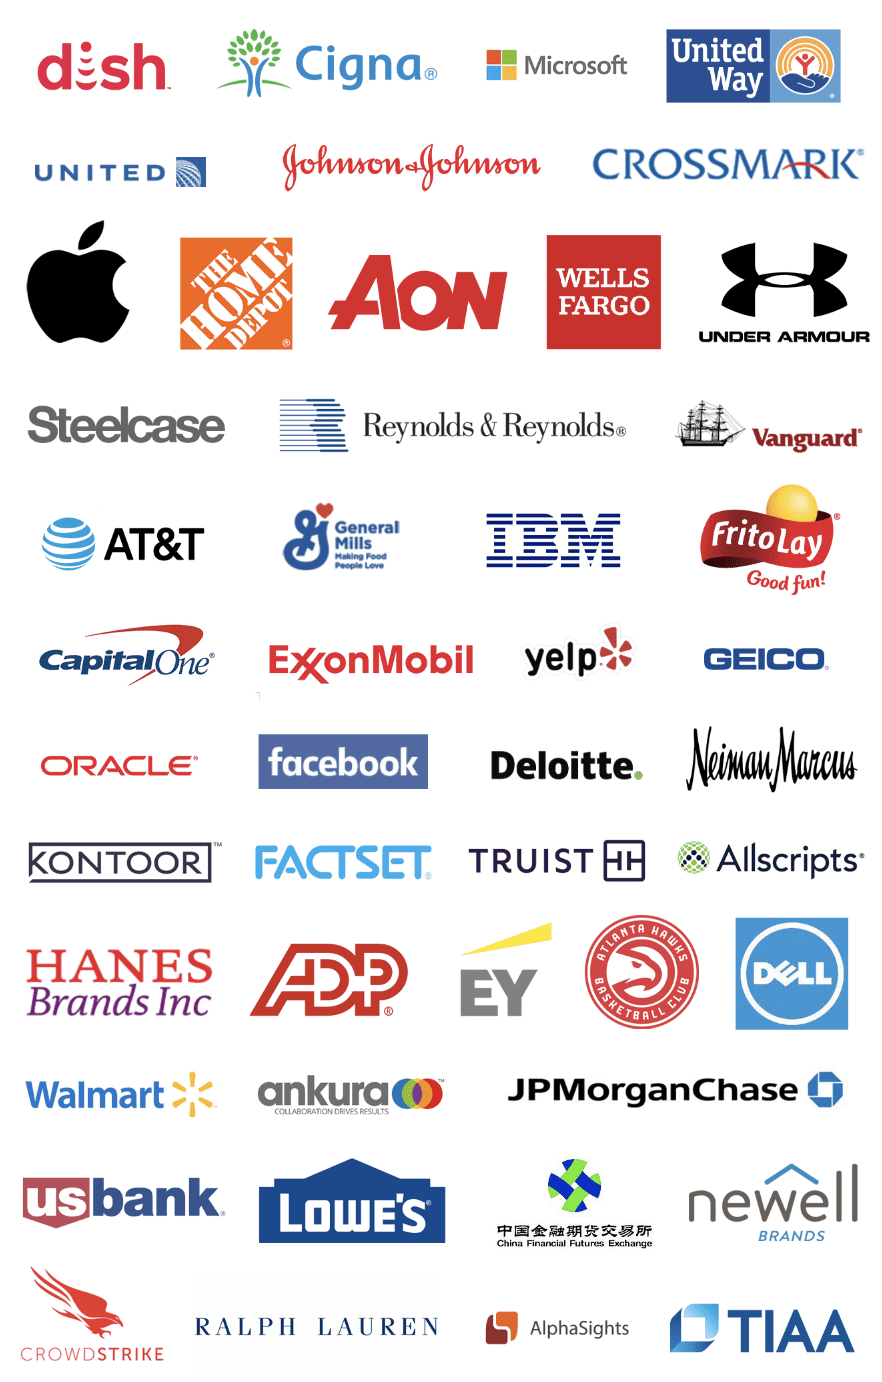 Organizations that have hired our graduates in recent years